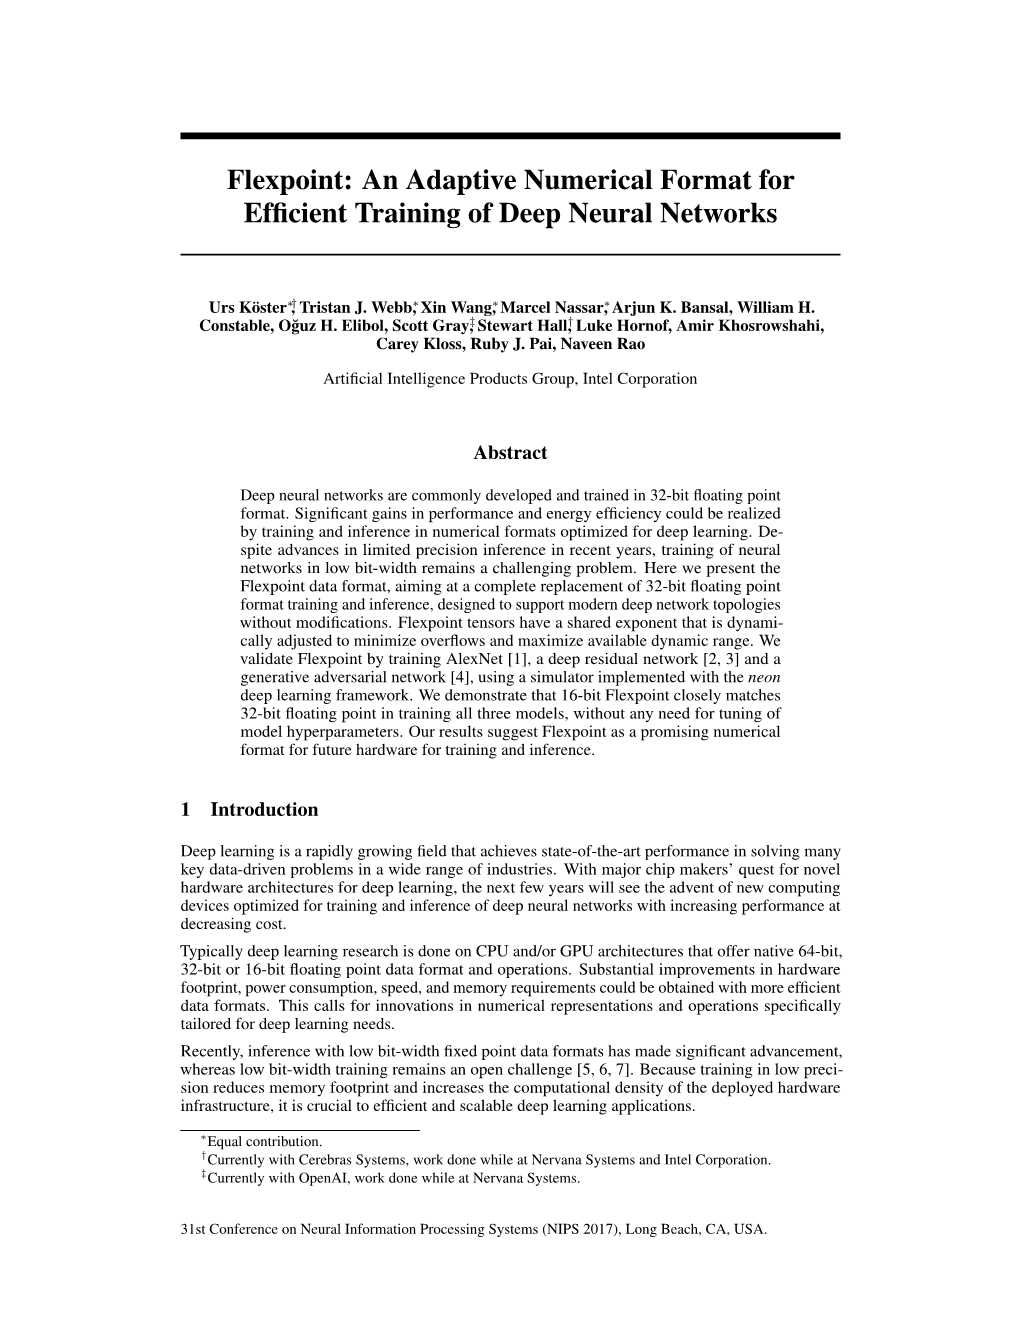 Flexpoint: an Adaptive Numerical Format for Efficient Training of Deep